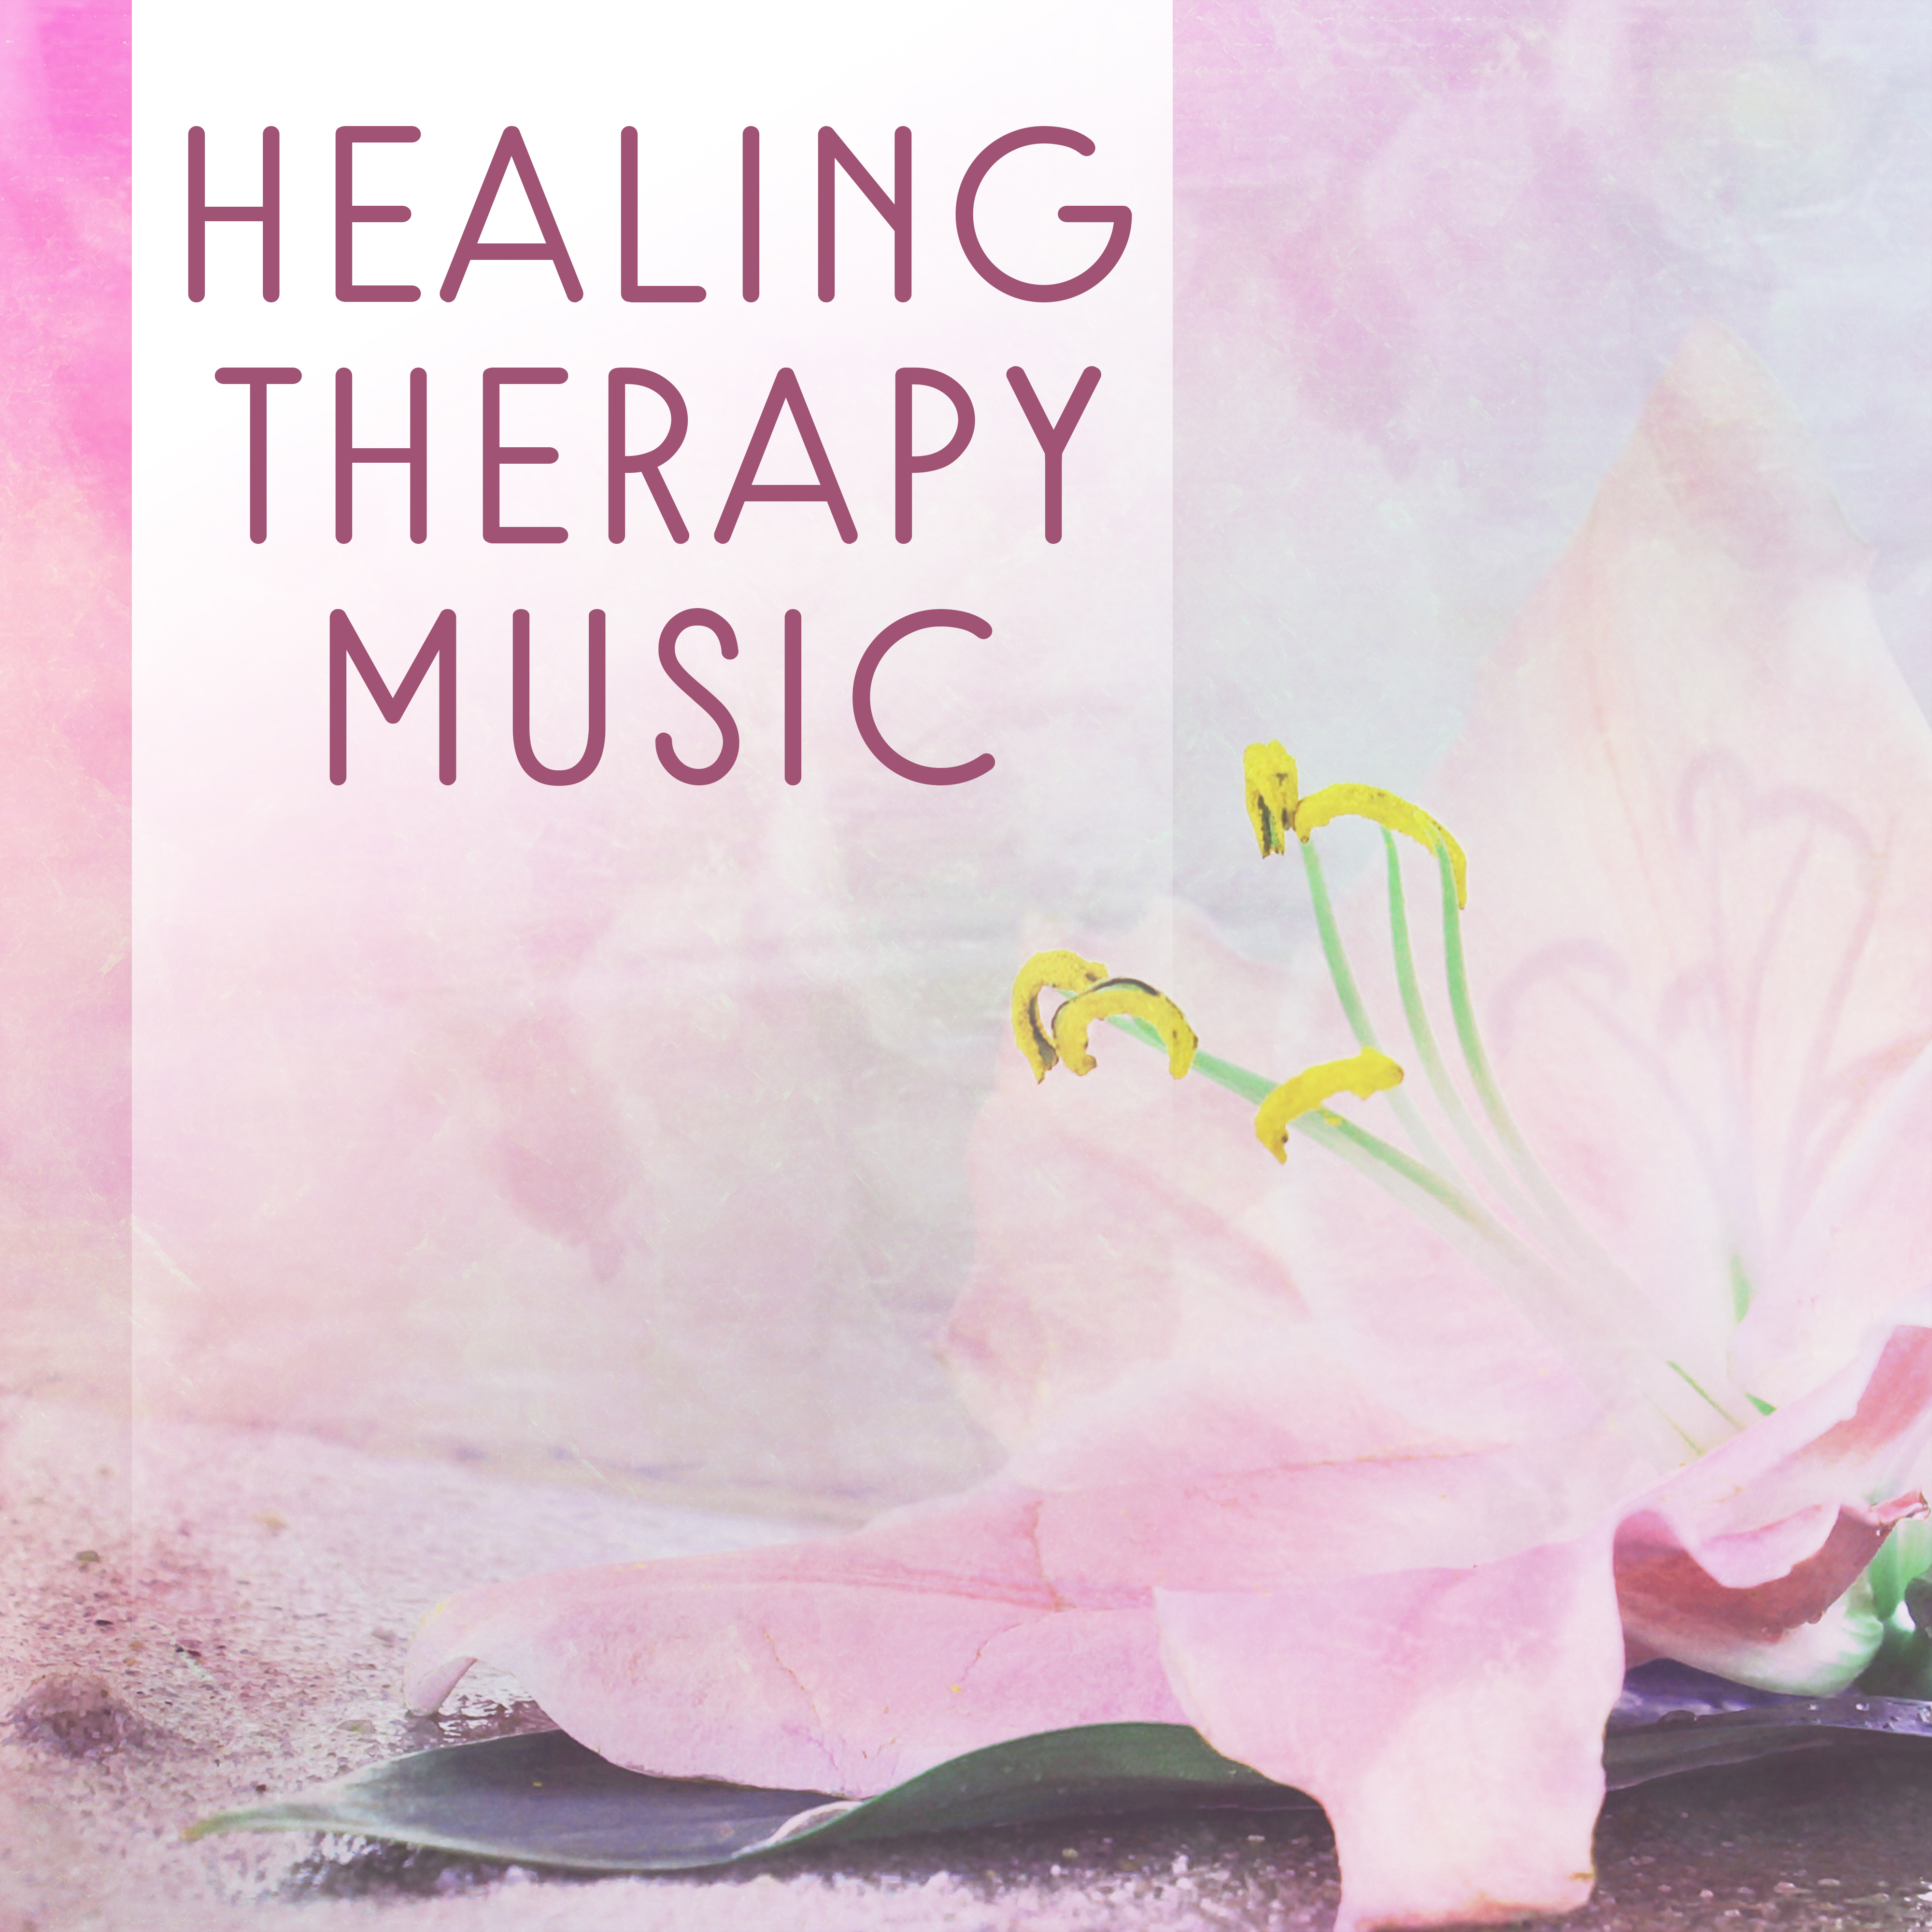 Healing Therapy Music – Spa Dreams, Relaxation Sounds for Wellness, Pure Massage, Nature Sounds, Stress Free, Spa Music, Relief